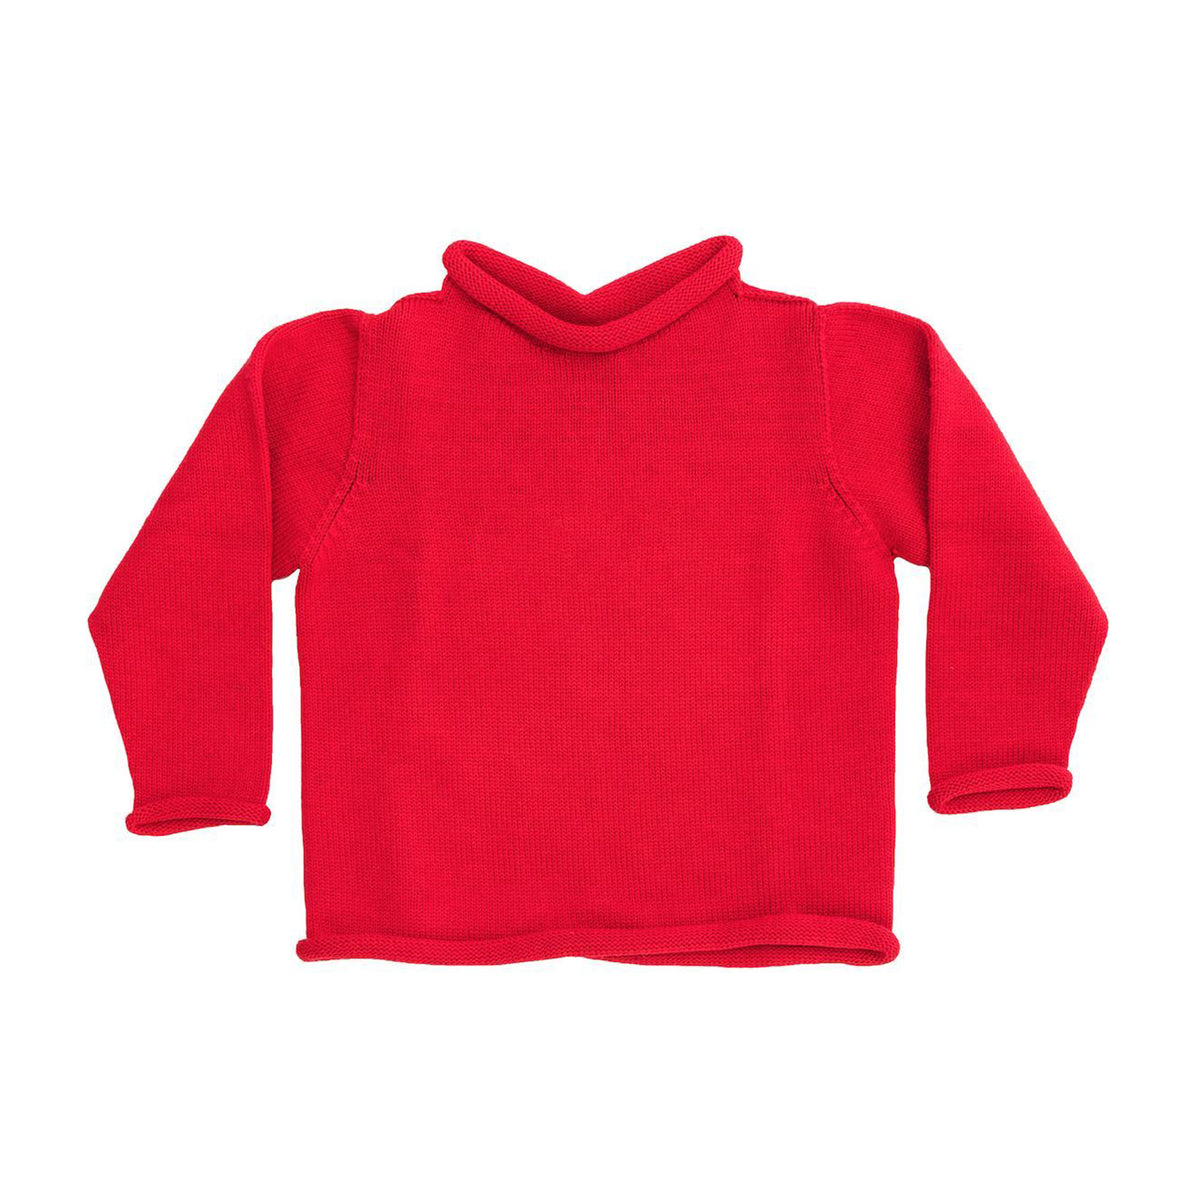 Red Cotton Rollneck Sweater - All She Wrote